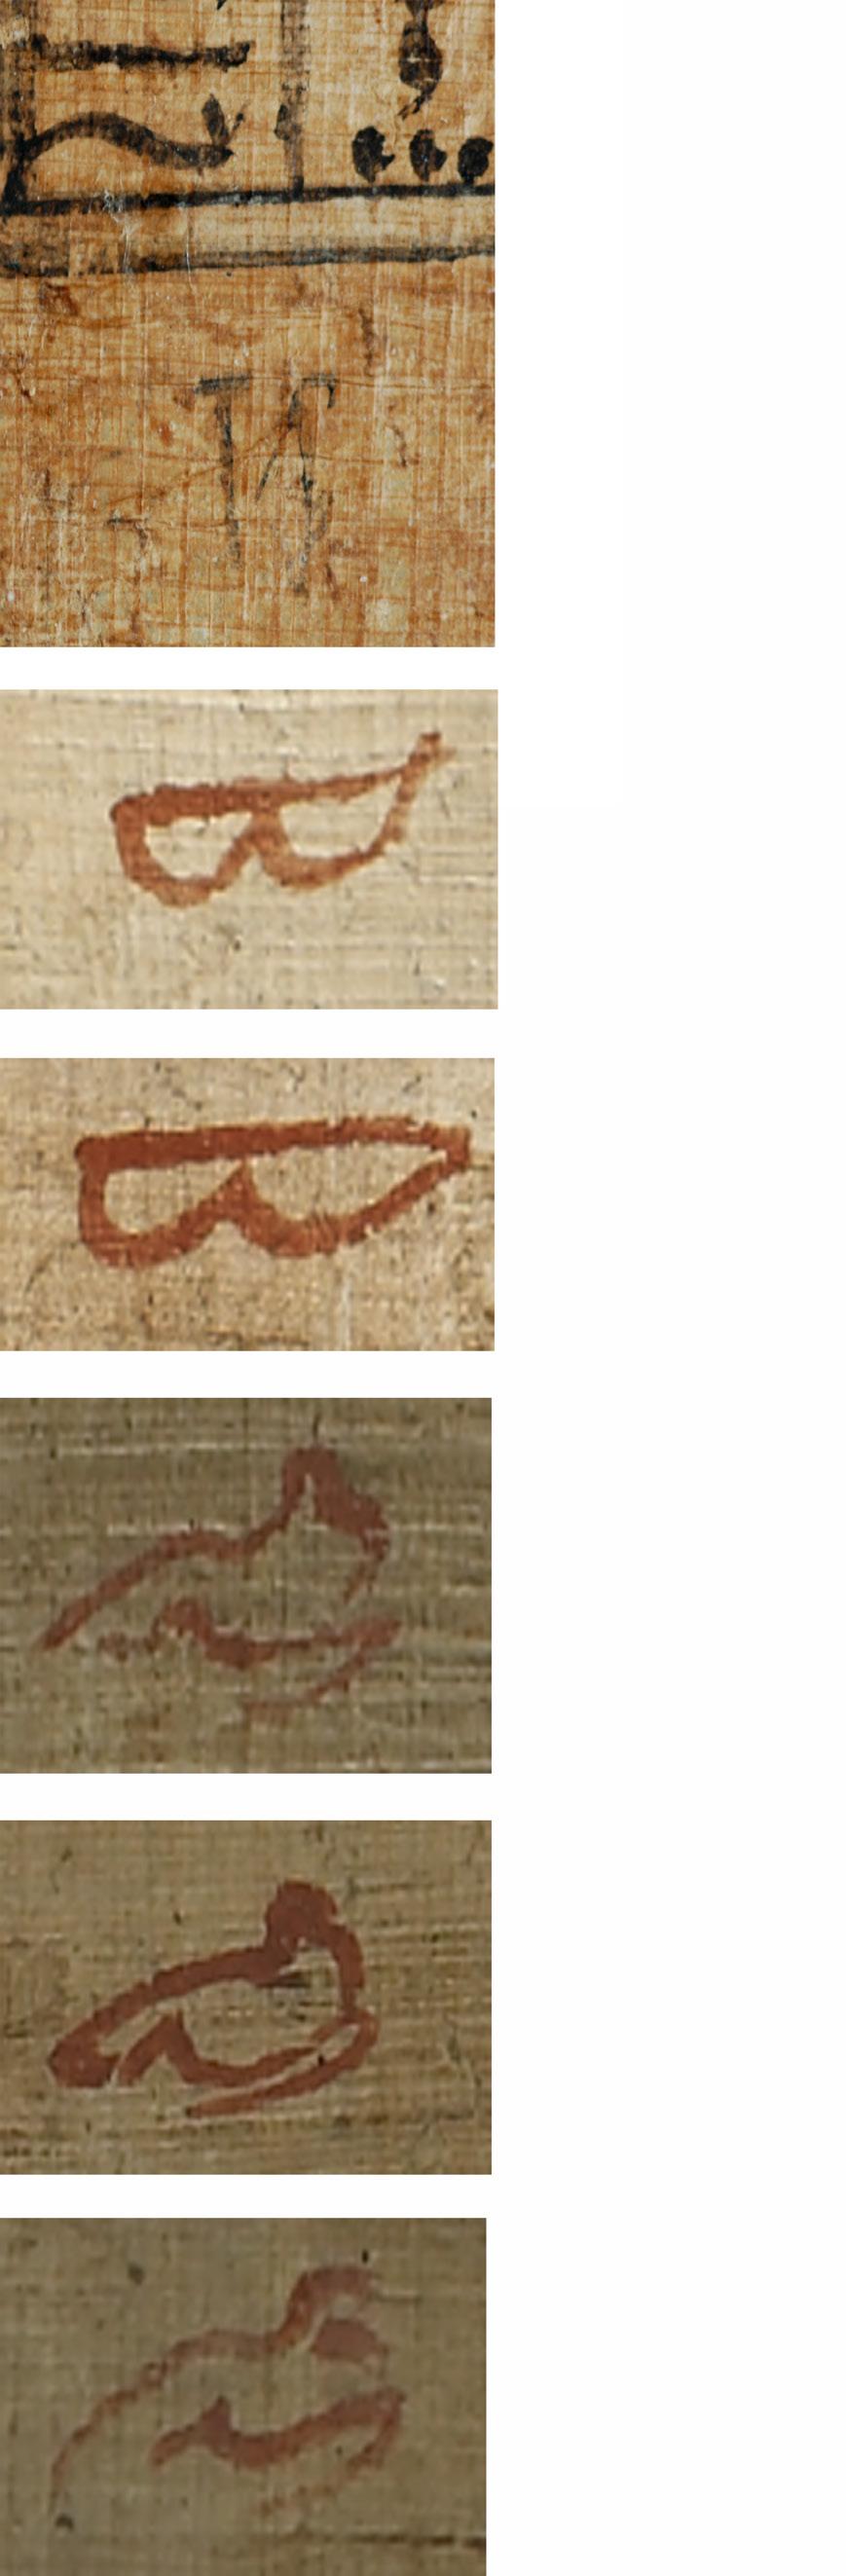 PRELIMINARY FINDINGS ON THE ROLL FORMATION OF THE GREENFIELD PAPYRUS Fig. 7: P.BM EA79431; Black sign in lower margin. Fig. 8: P.BM EA10554.13; Red sign in upper margin (bow). Fig. 9: P.BM EA10554.13; Red sign in lower margin (bow).